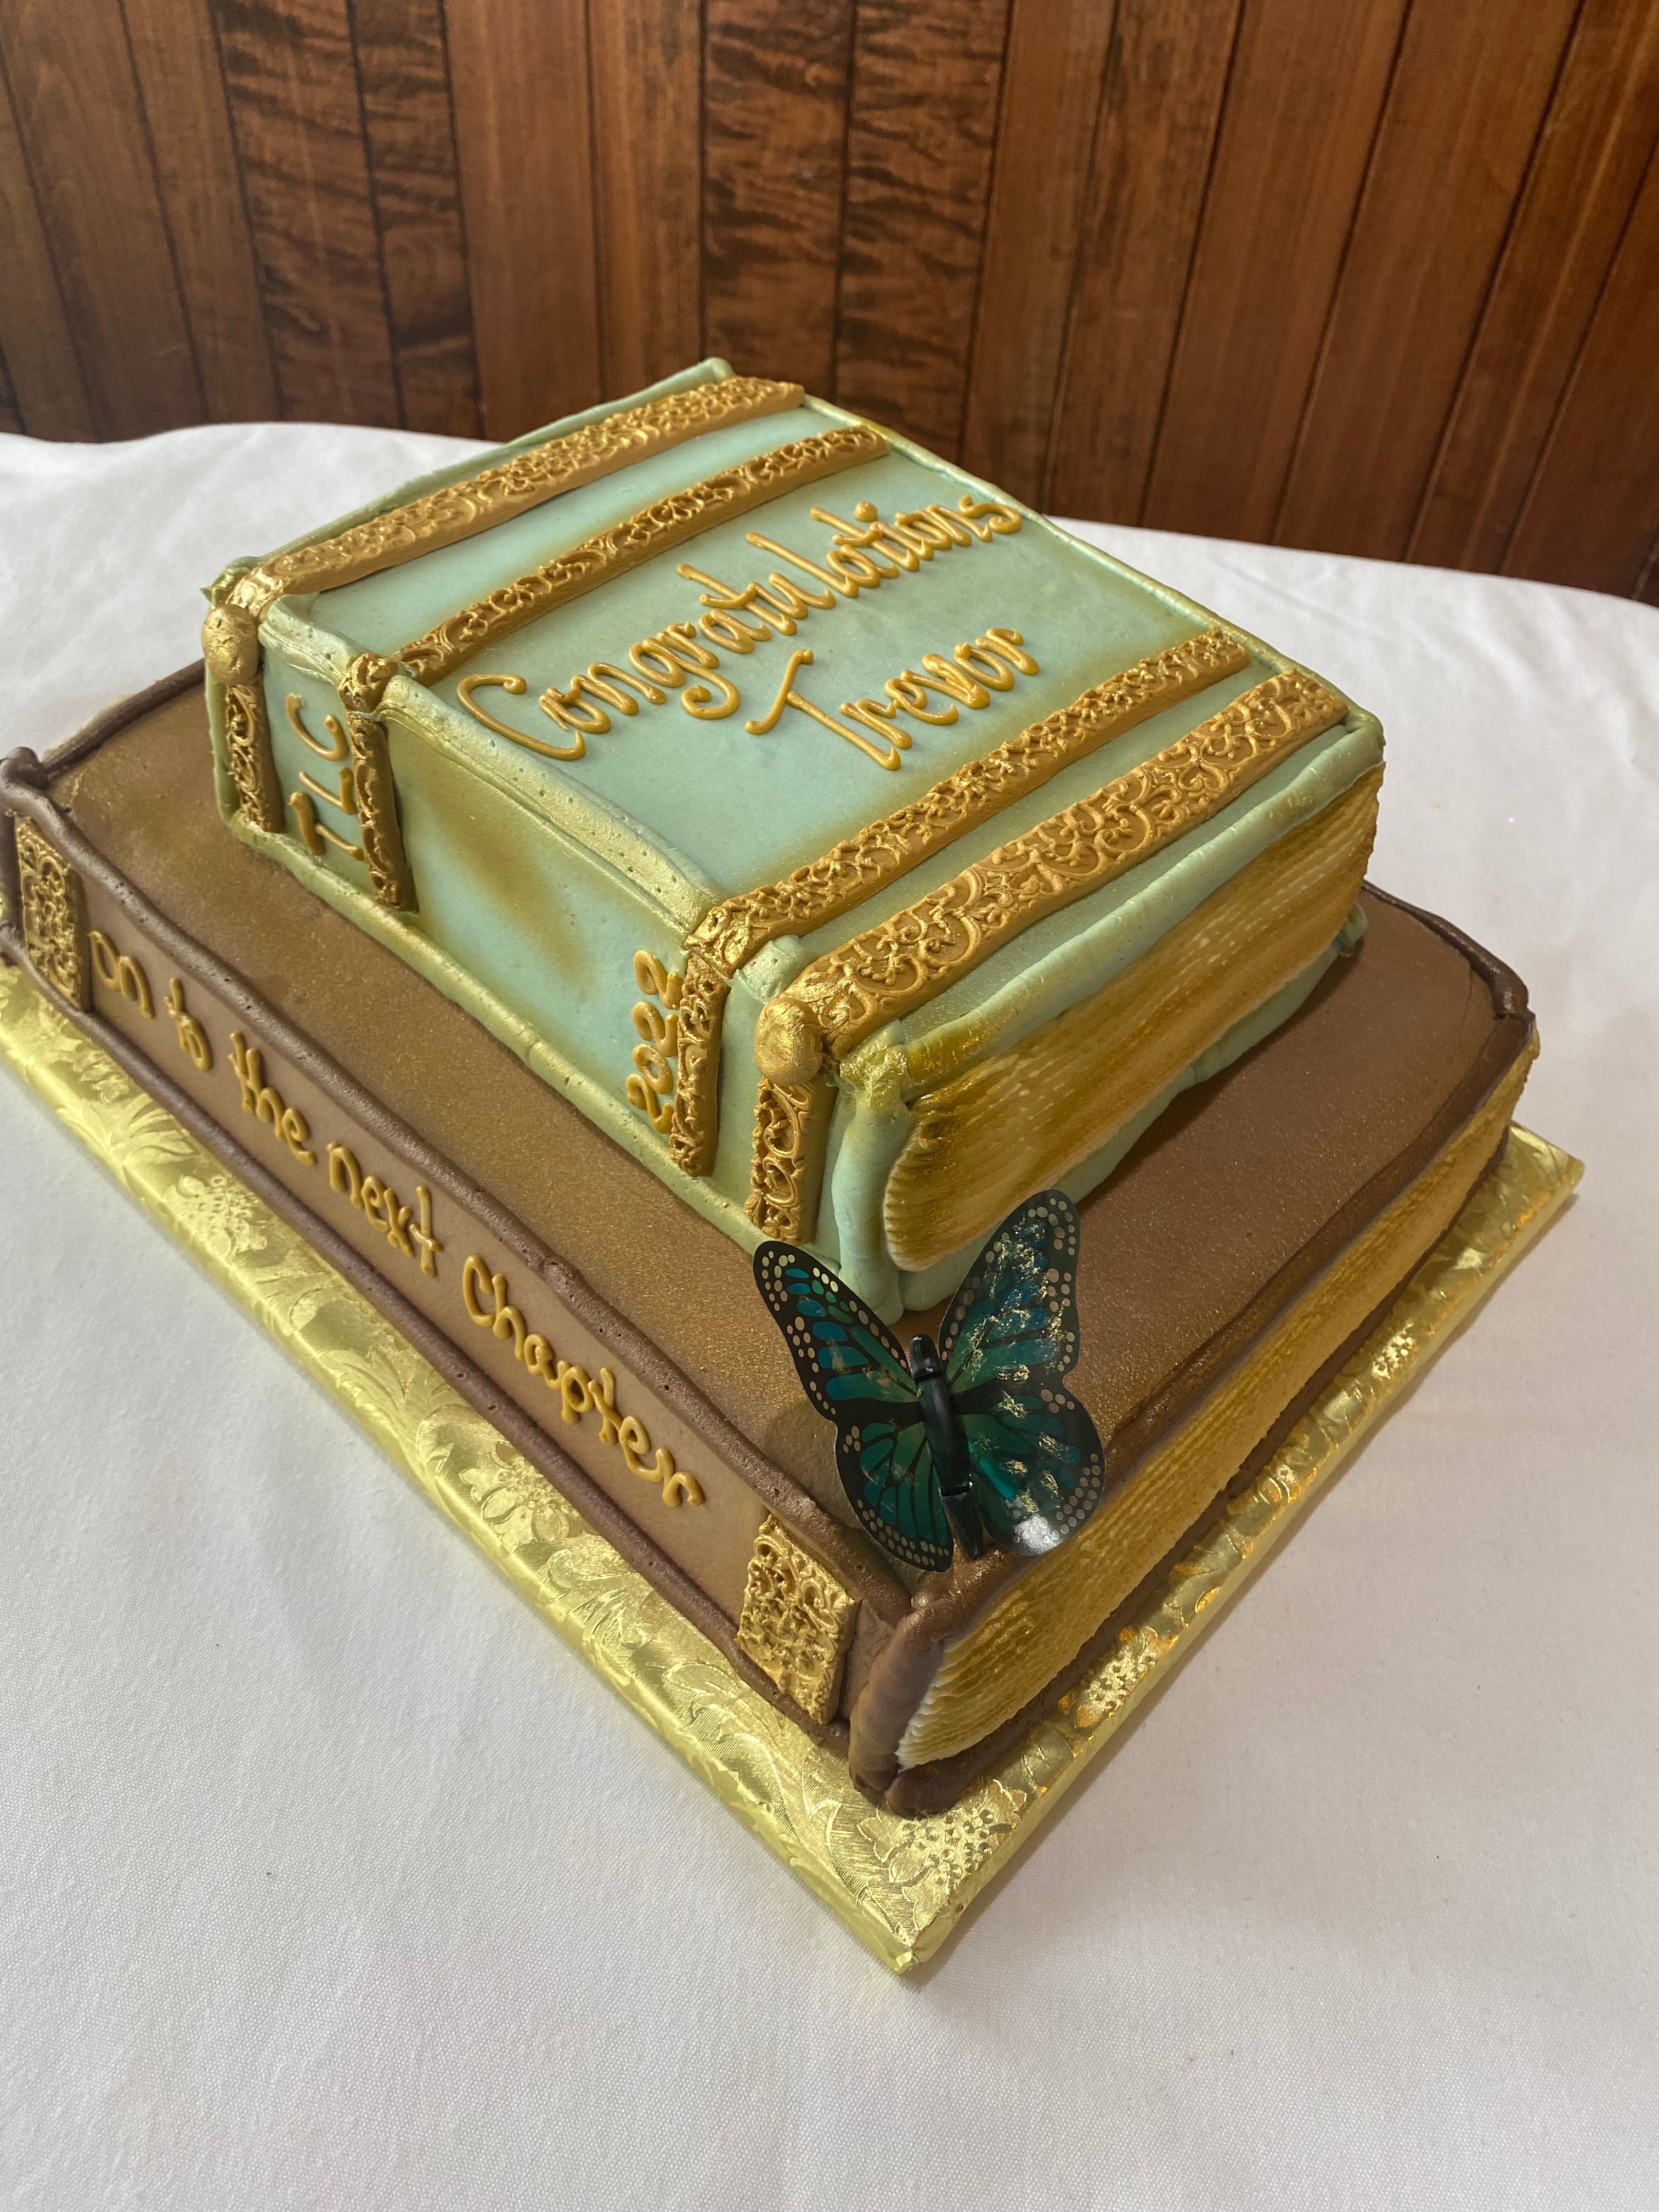 Book Cover Themed Cake - 14 inch - The London Vegan Bakery